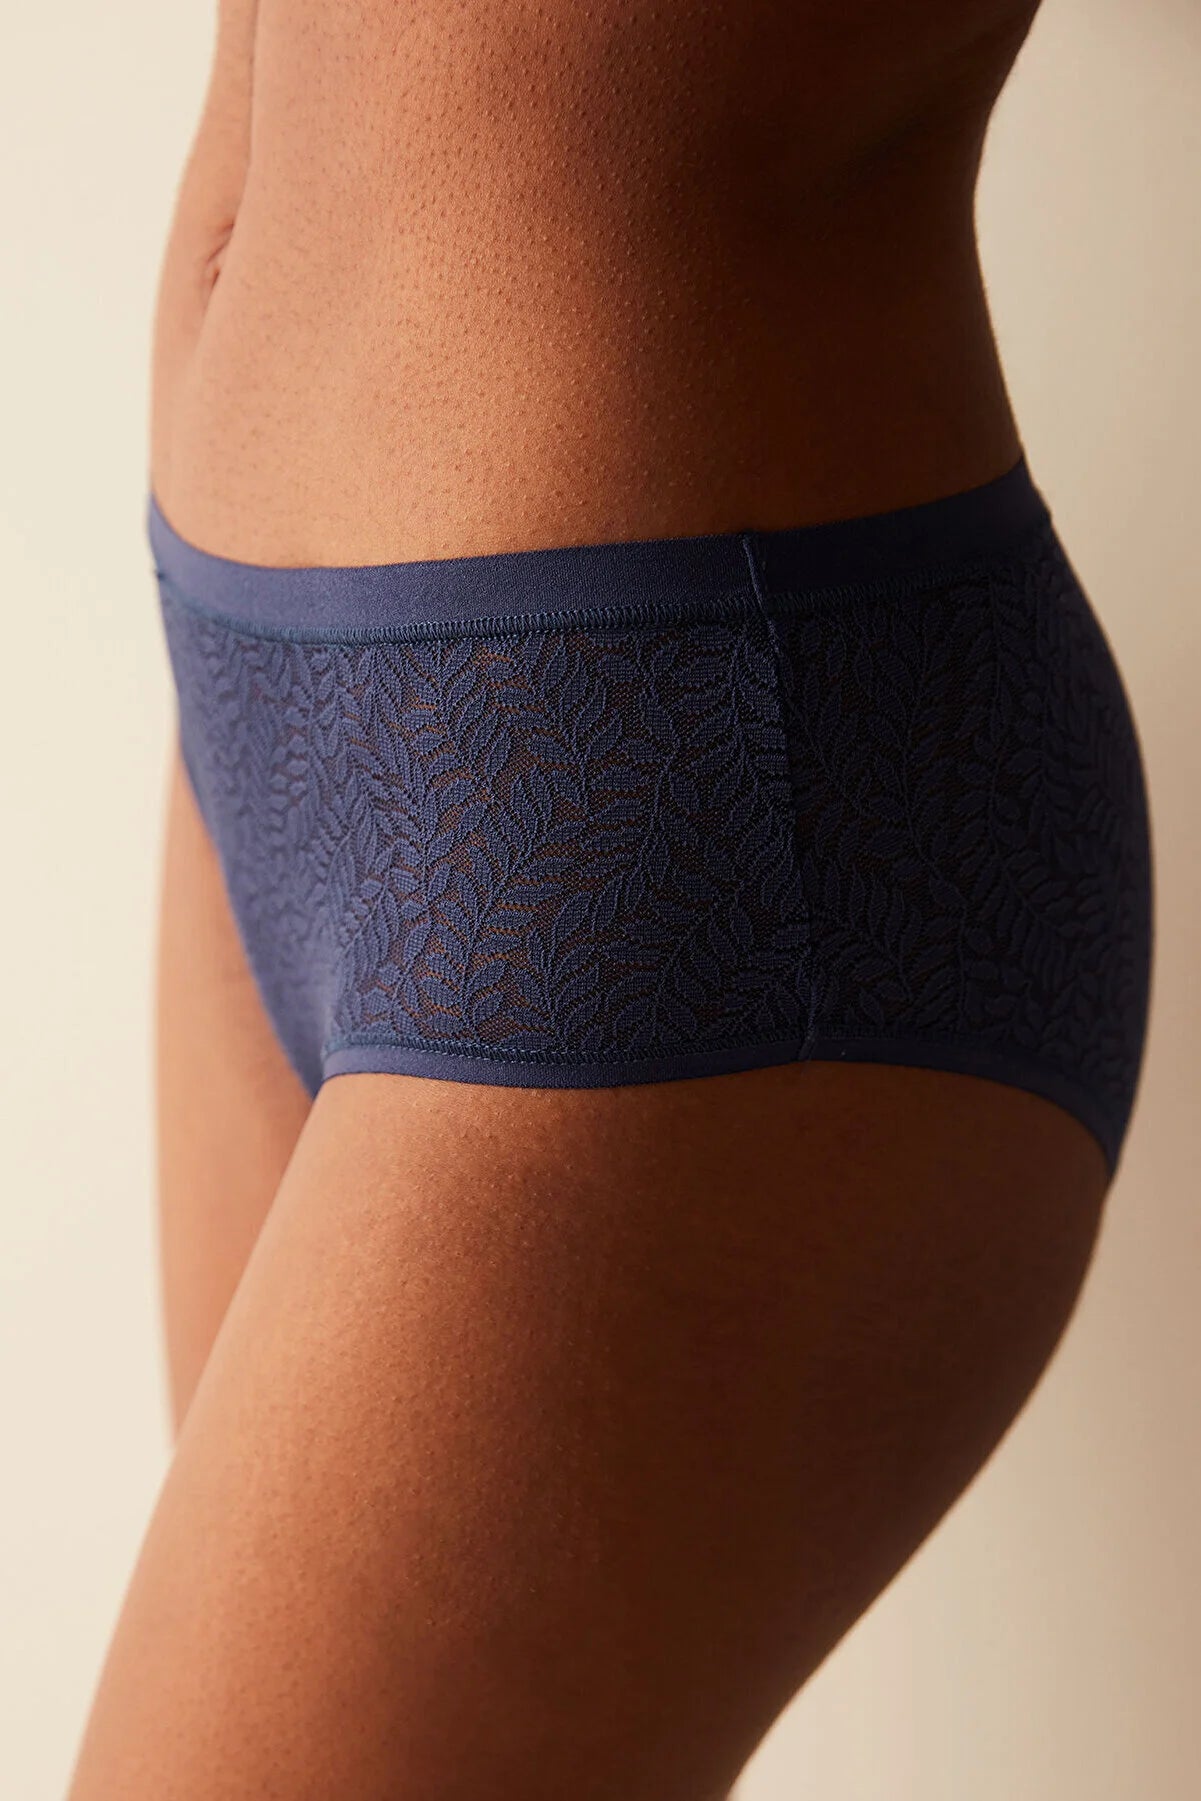 Lace Dream Navy Blue Hipster Panties - Comfort and Style in a 3-Pack Bundle